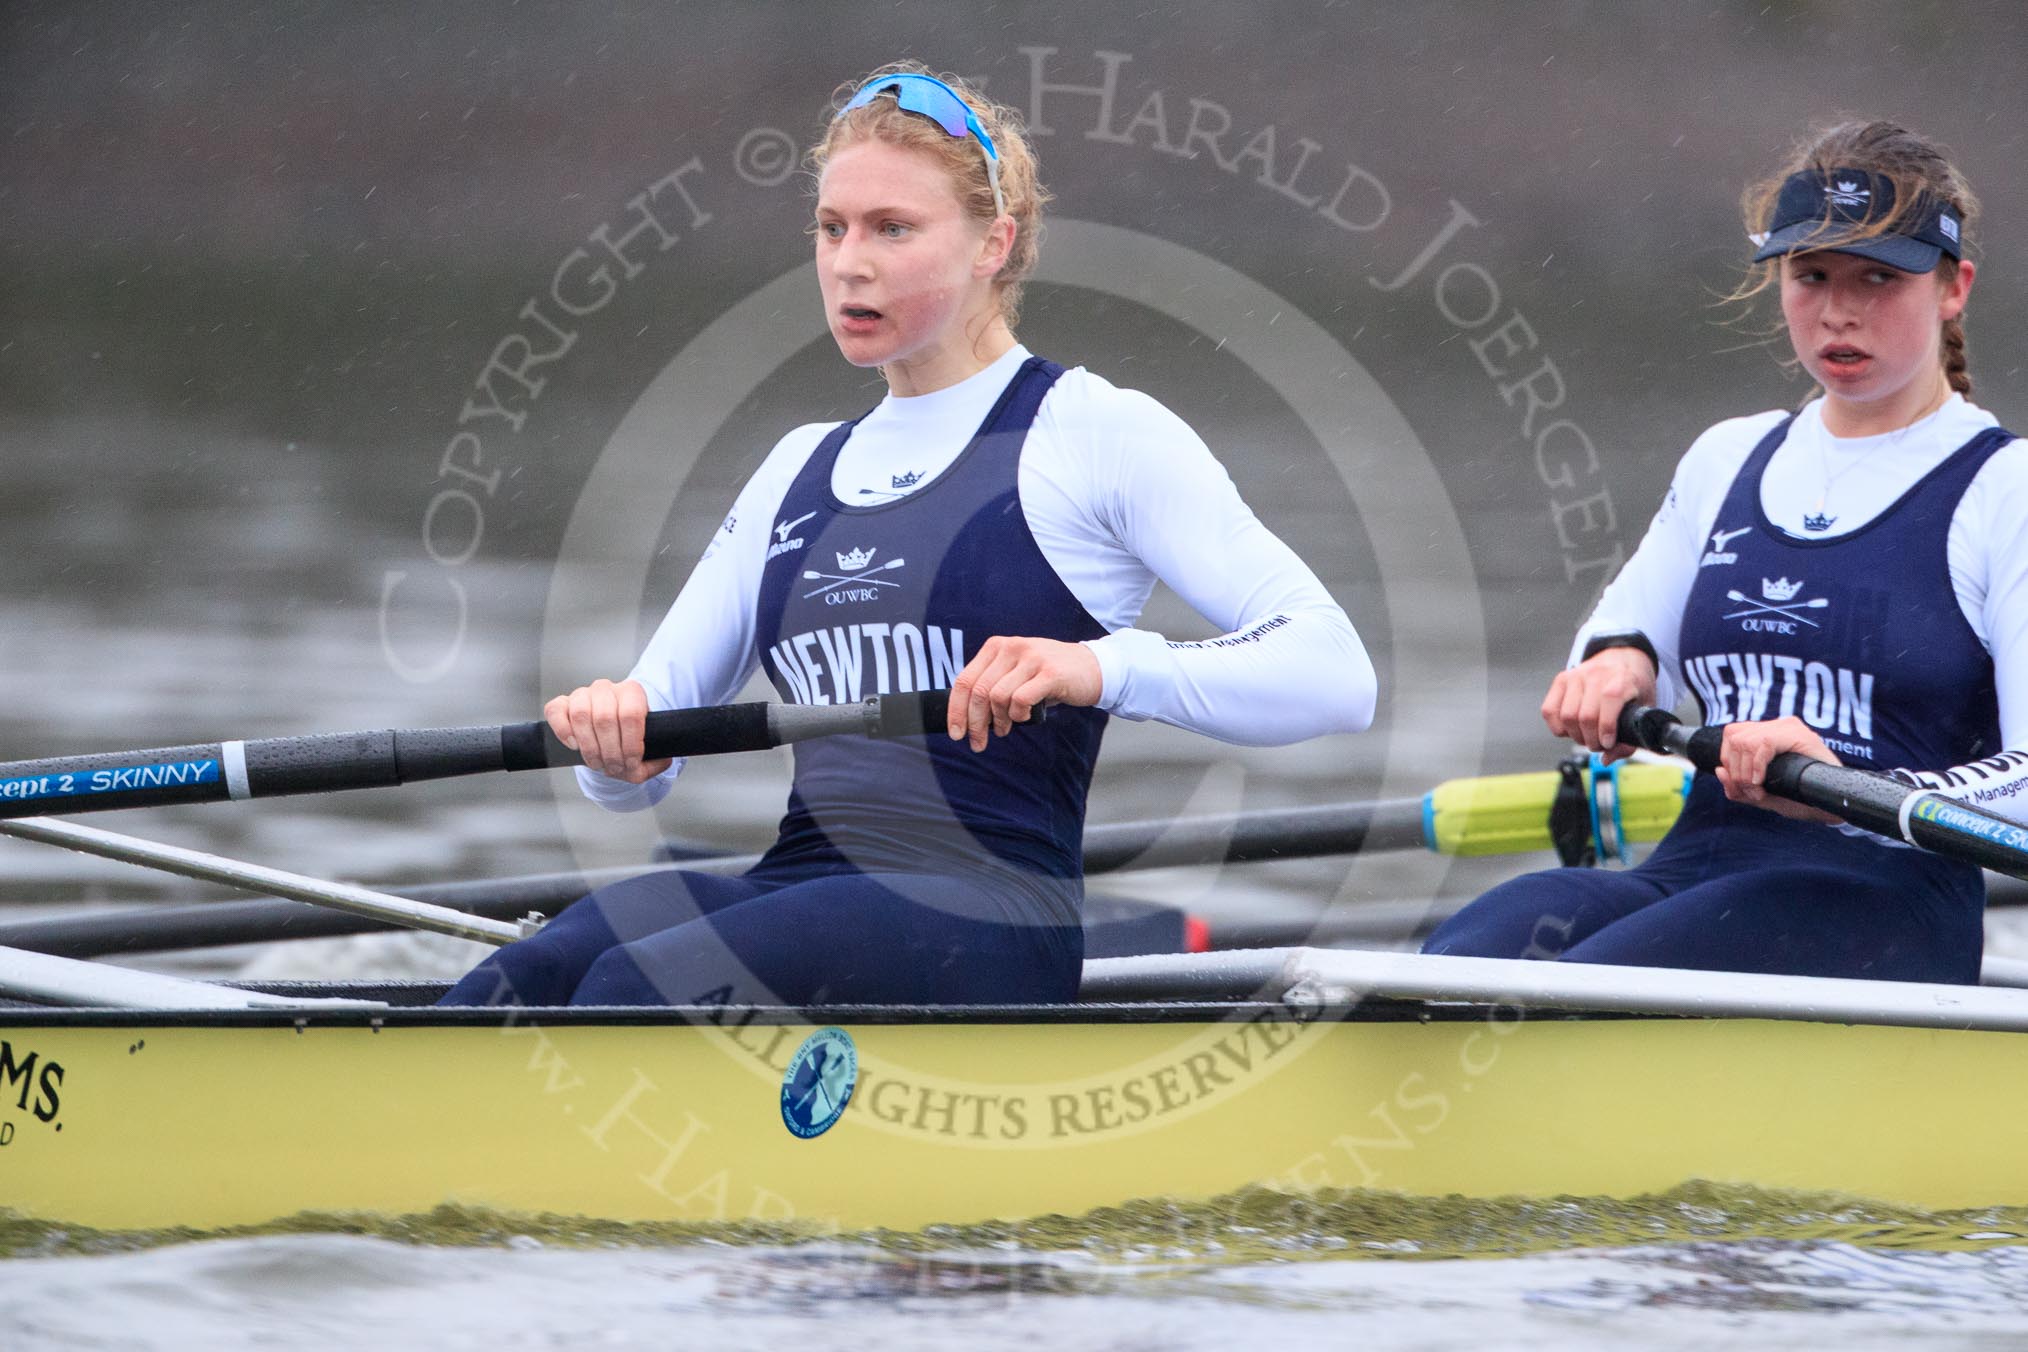 The Boat Race season 2018 - Women's Boat Race Trial Eights (OUWBC, Oxford): "Coursing River" -  stroke Beth Bridgman, 7 Juliette Perry.
River Thames between Putney Bridge and Mortlake,
London SW15,

United Kingdom,
on 21 January 2018 at 14:38, image #130